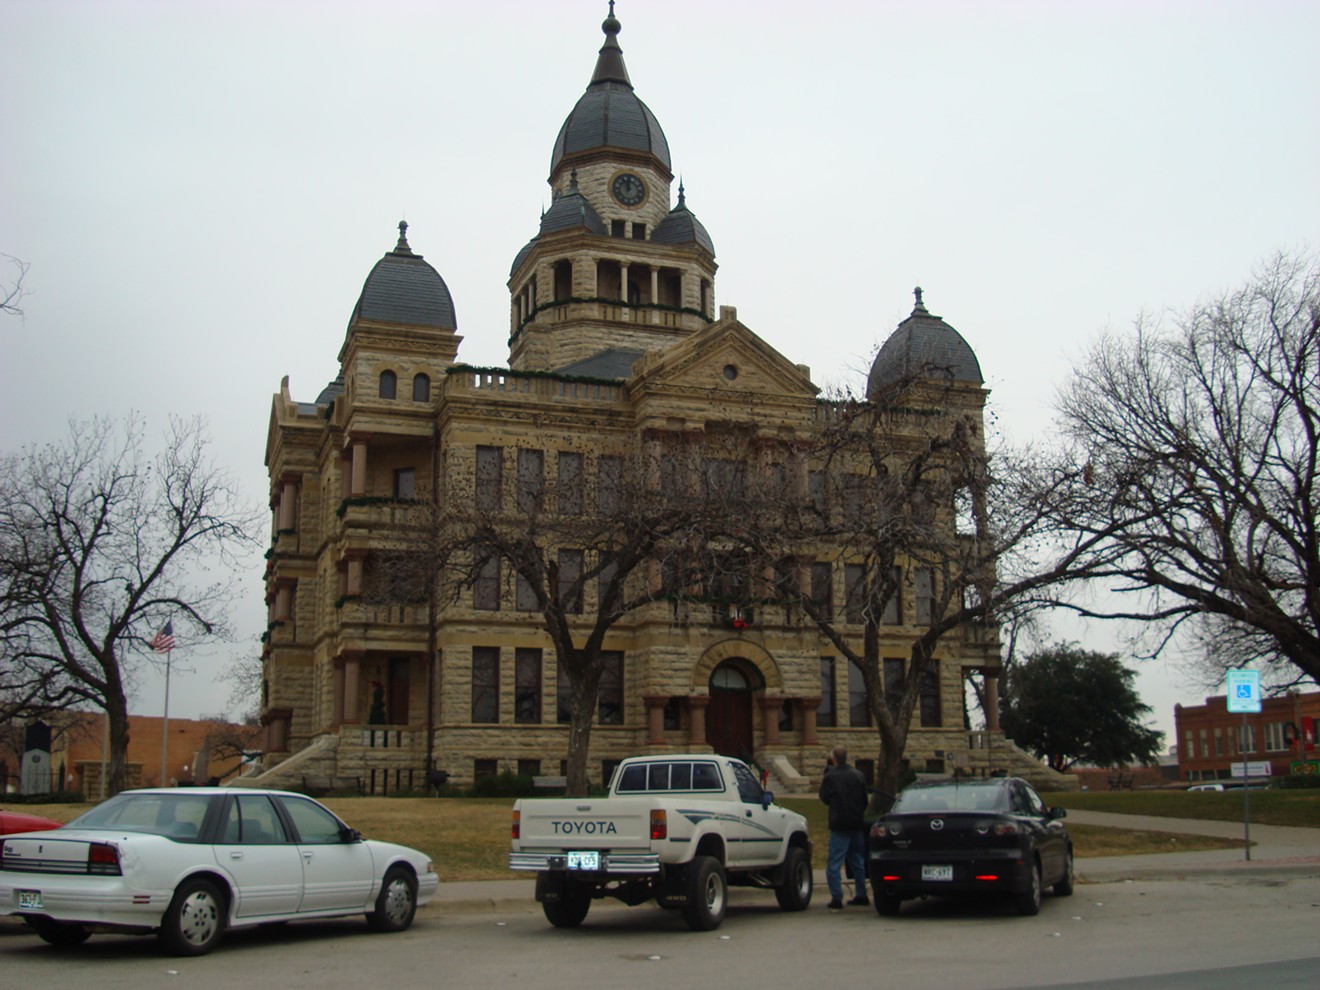 Denton's courthouse on the square.